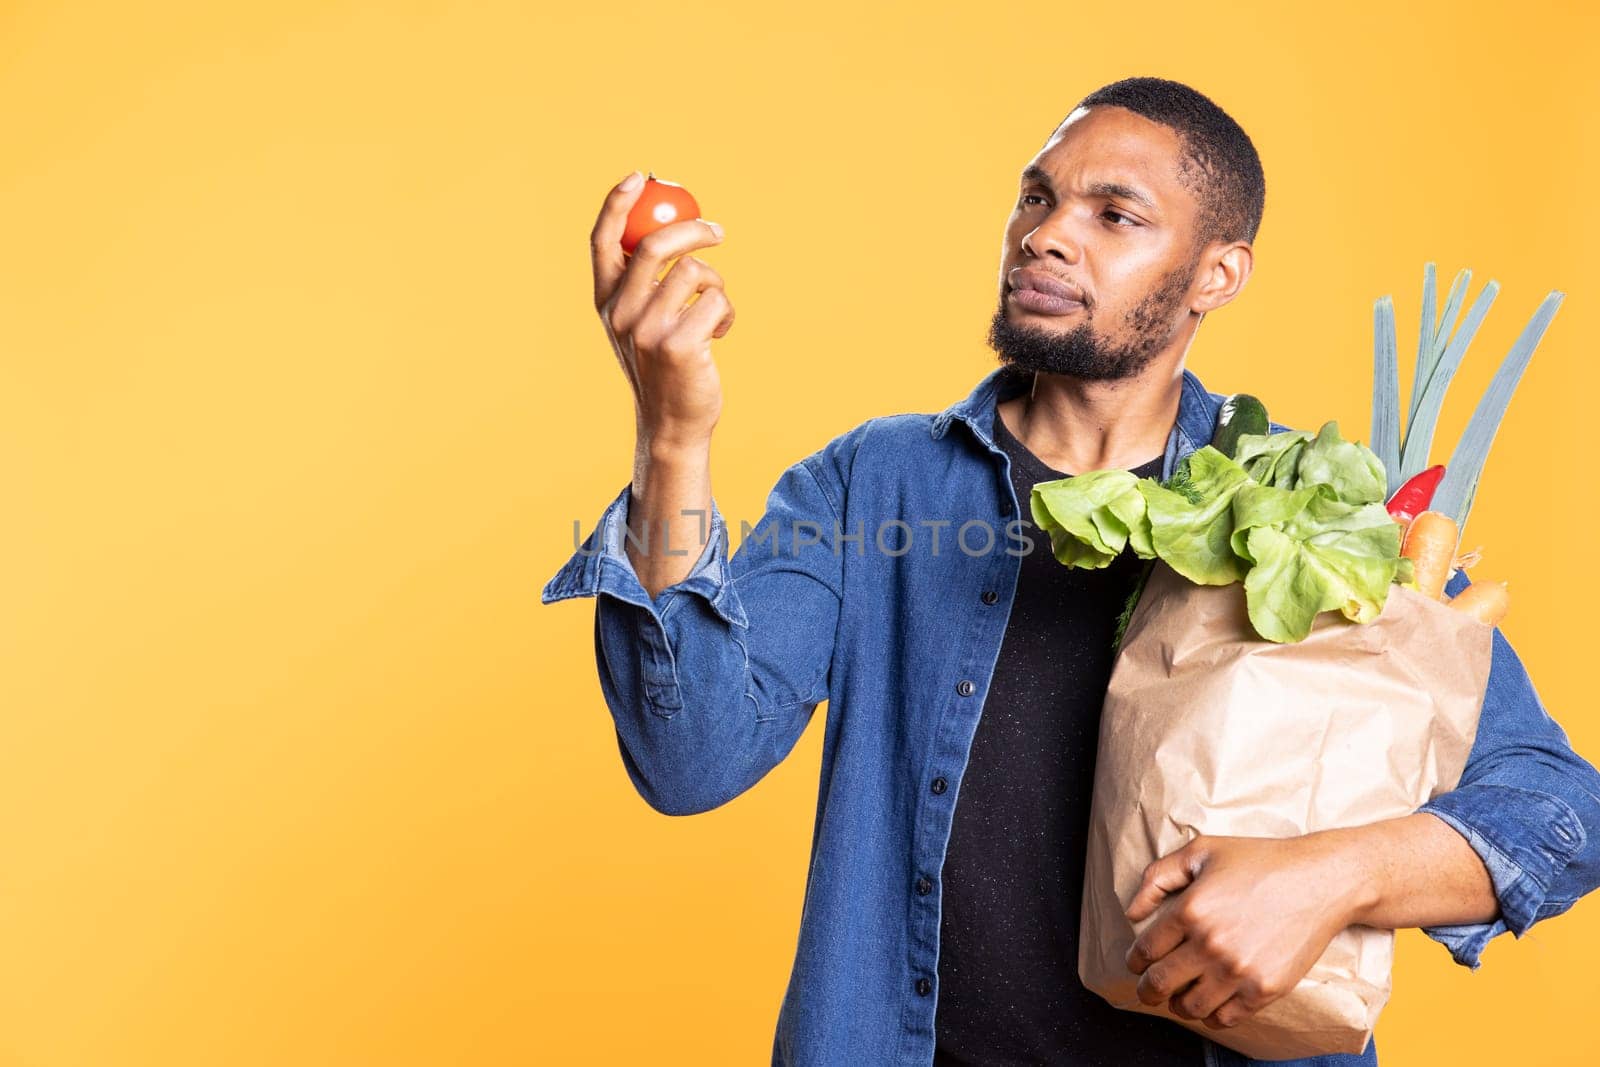 Vegan male person admiring a fresh ethically sourced tomato by DCStudio